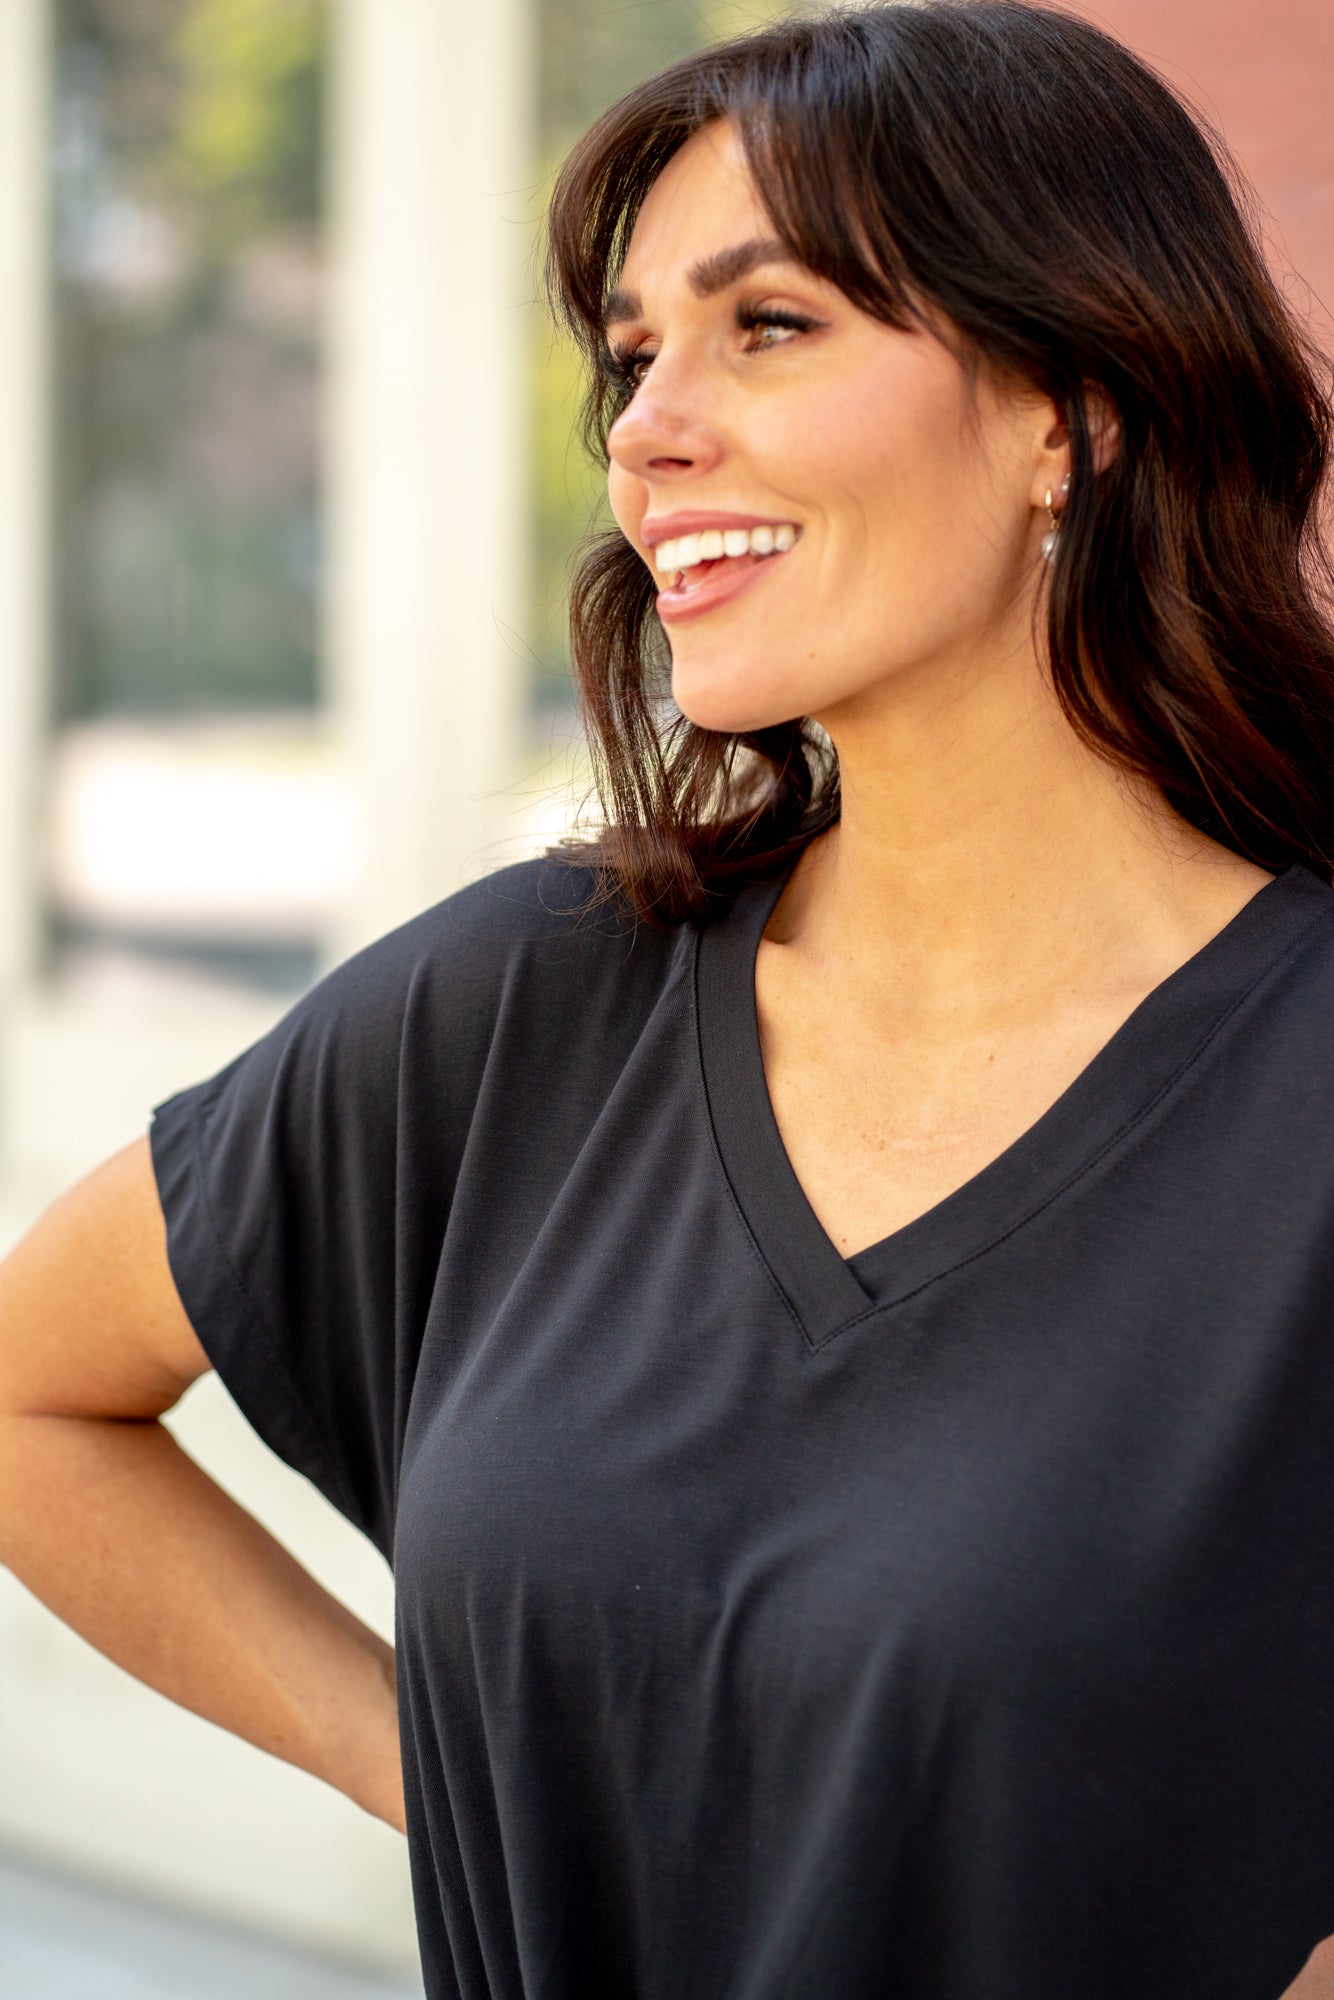 Thread & Supply  This classic V-neck tee is a forever favorite you'll be asking for in every color. Designed in a light and airy silhouette, and our signature soft fabric, this top is bound to keep you cool this season  Color: Graphite Neckline: V-Neck Sleeve: Short Sleeve 89% Polyester 11% Spandex Style #: T1502LZMTS-GY021 Contact us for any additional measurements or sizing. 